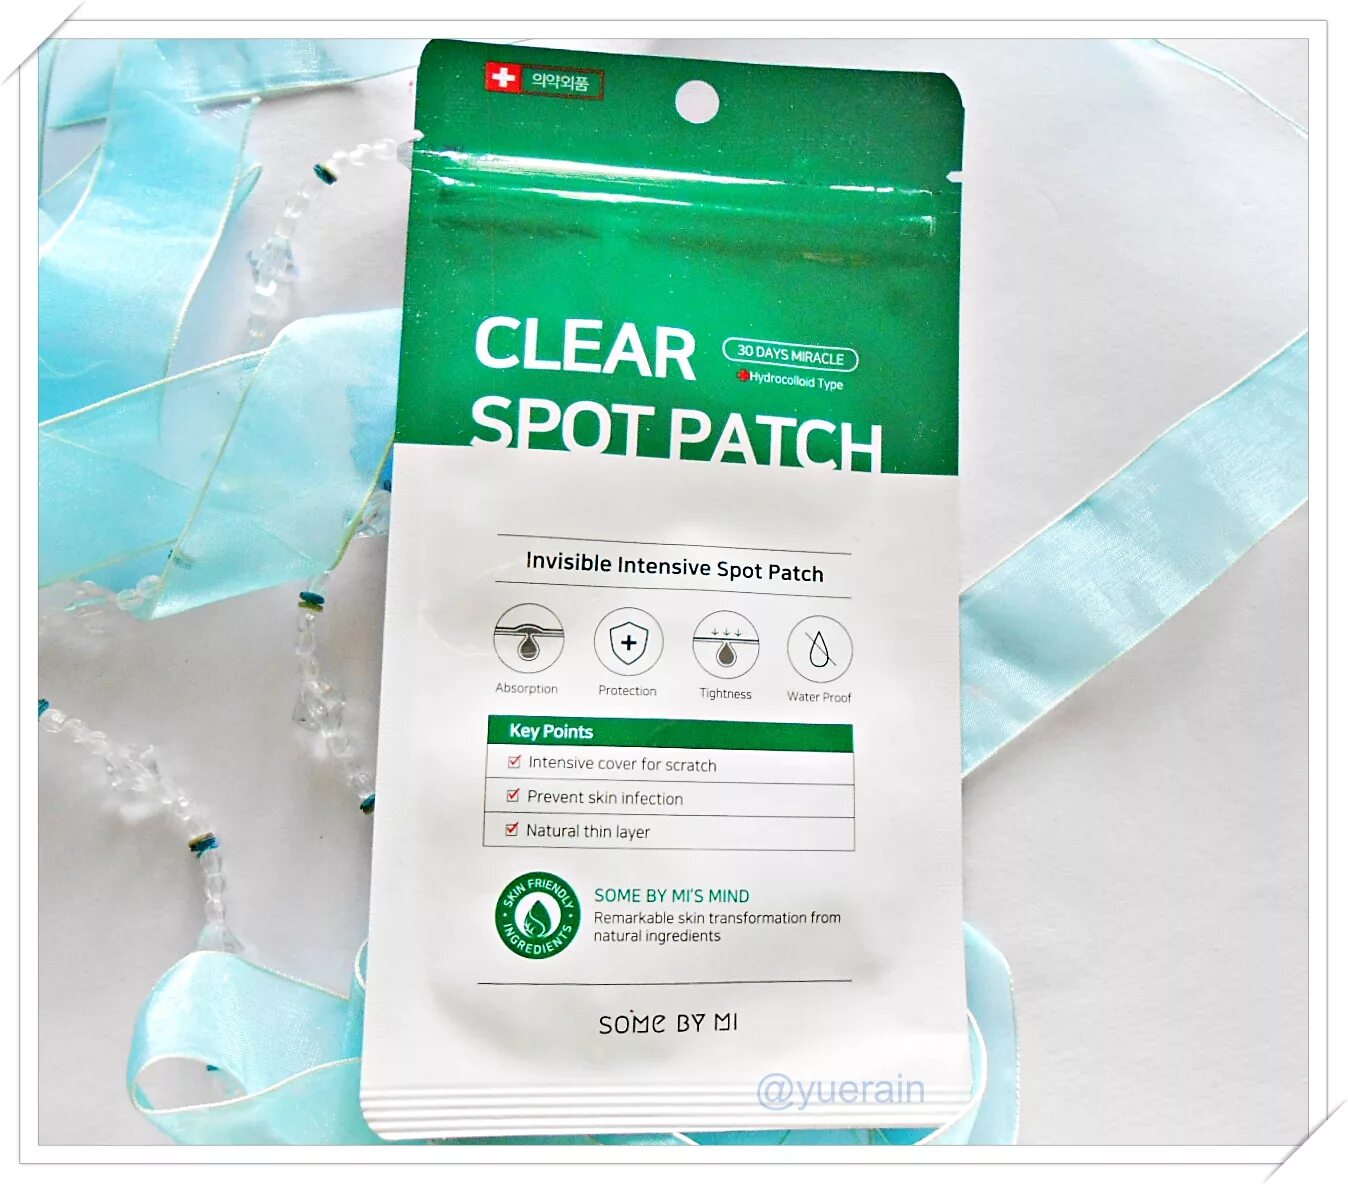 Some by mi 30 Days Miracle Clear spot Patch. Some by mi патчи от прыщей. Clear spot Patch. SOMEBYMI Clear spot Patch. Clear patch